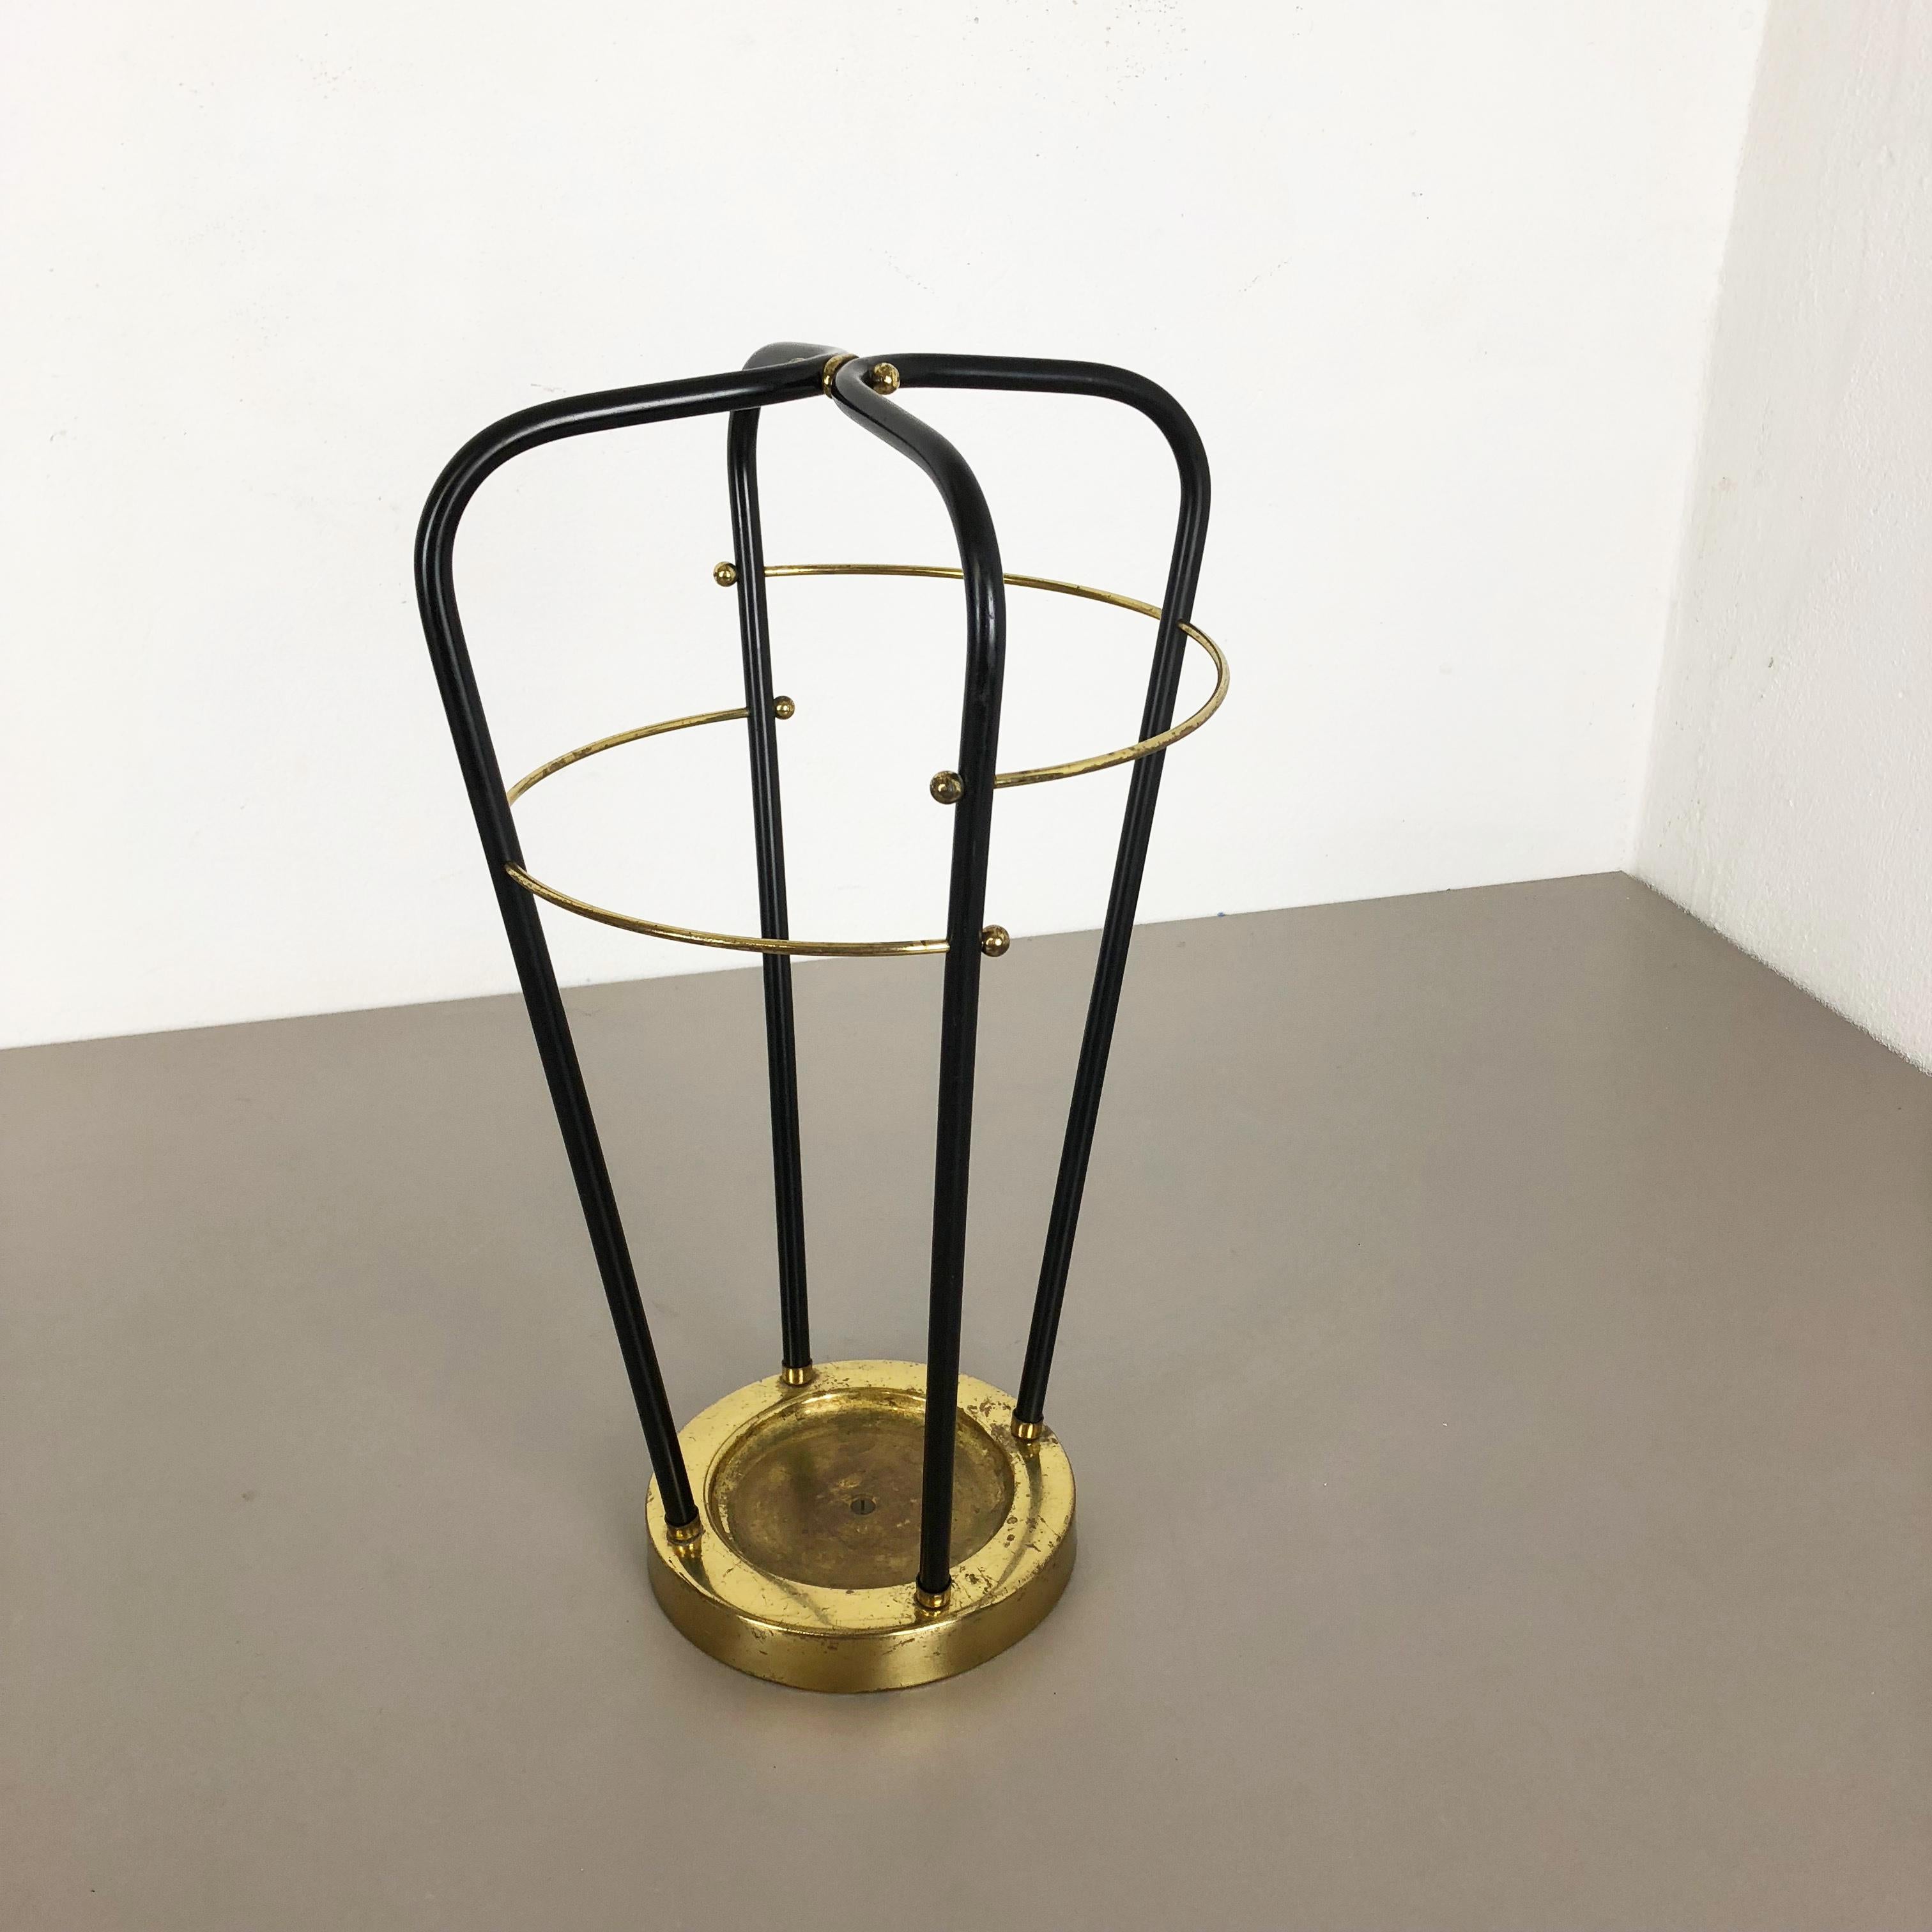 Article:

Bauhaus umbrella stand


Origin:

Germany


Age:

1950s


This original vintage Bauhaus style umbrella stand was produced in the 1950s in Germany. The bottom dipping base top elements has a golden then brass finish, the